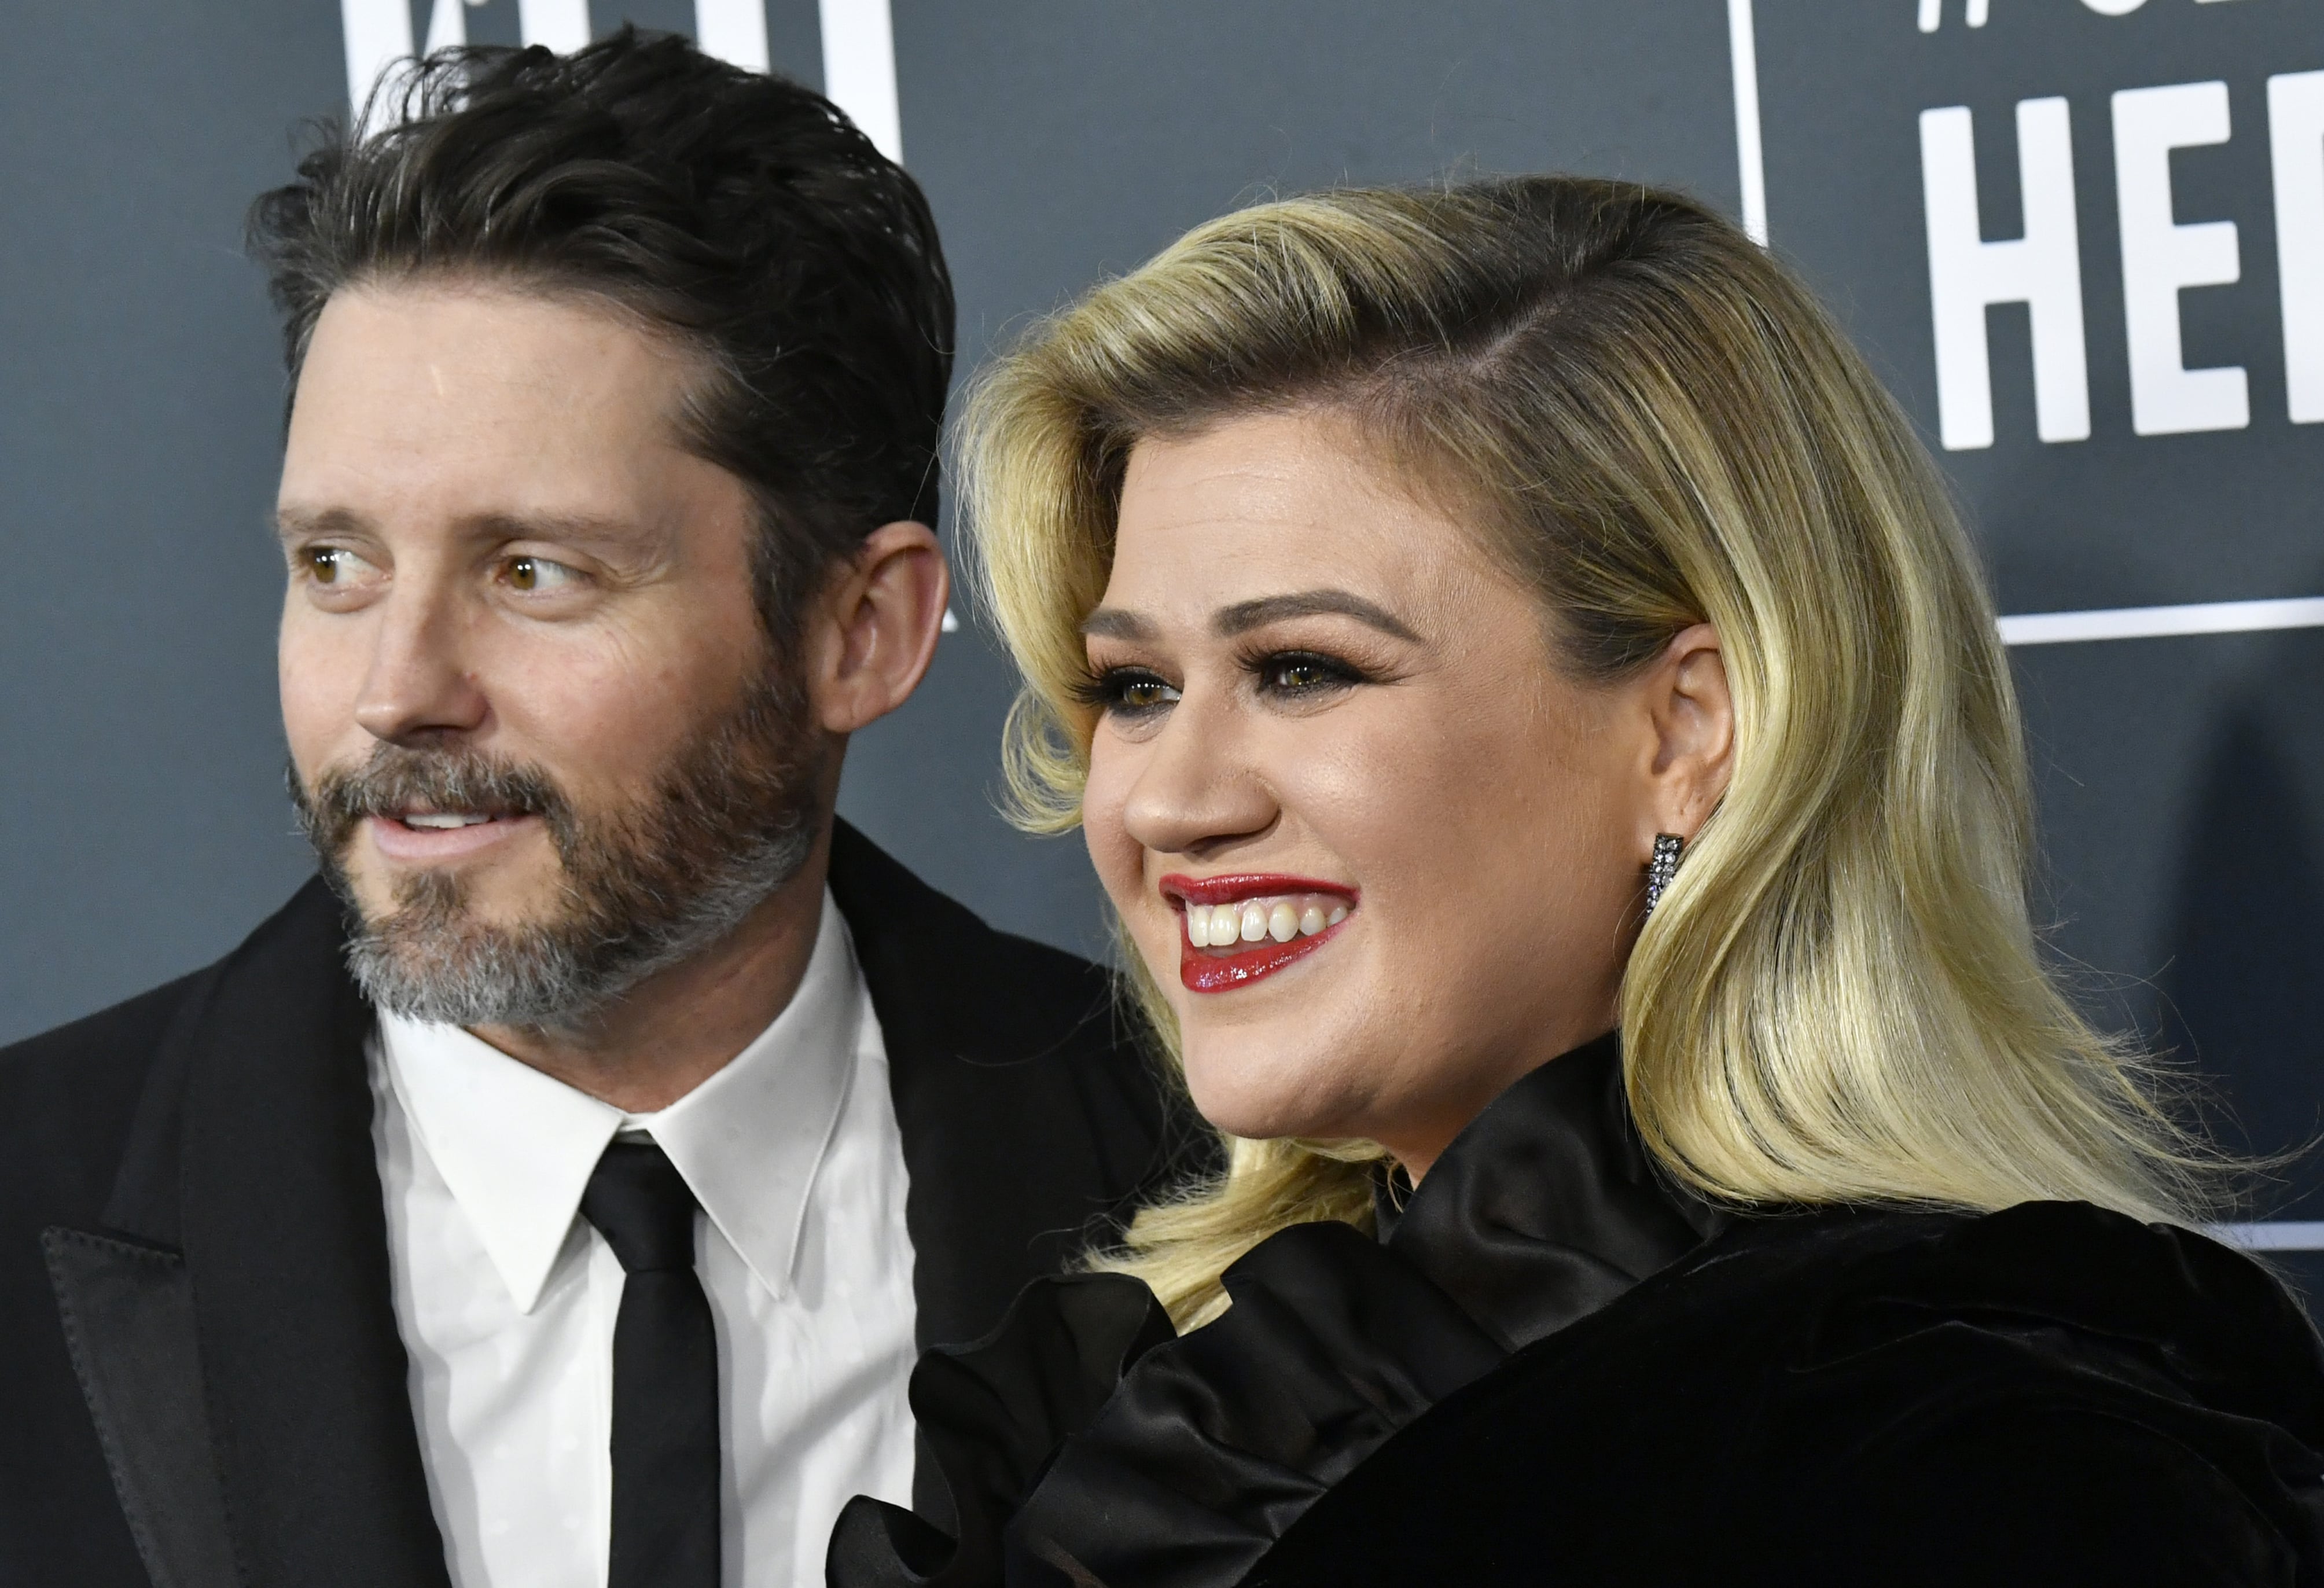 Kelly Clarkson Says She Did Not Handle Her Divorce “Gracefully”